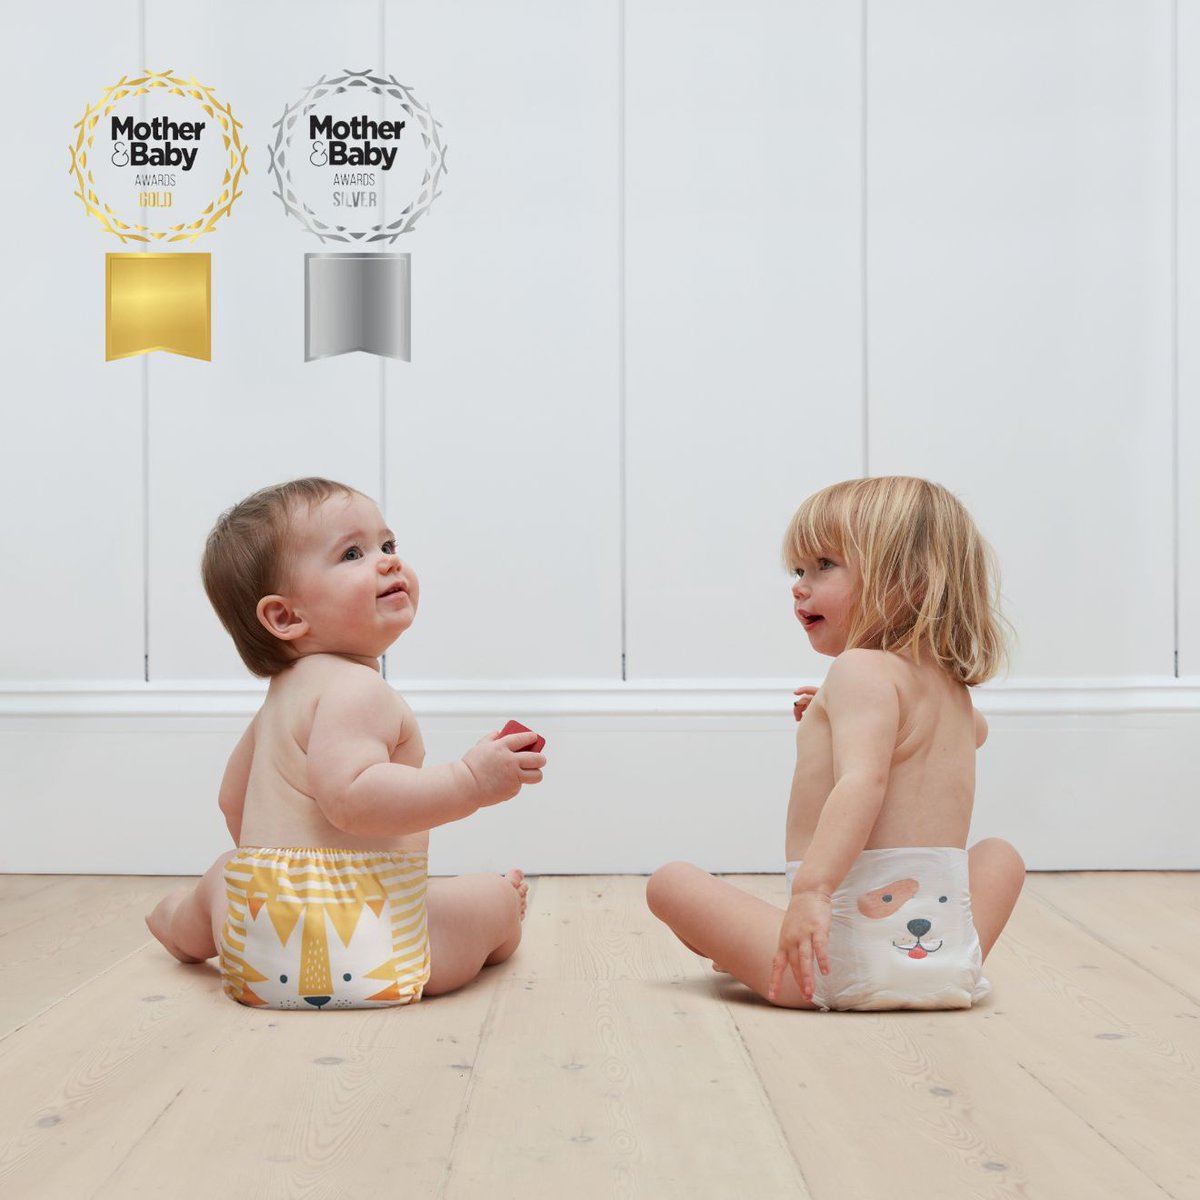 The only nappy brand to offer parents the choice of plant-based eco nappies, and reusable nappies. We've won gold & silver in both categories for the 2024 Mother & Baby Awards. The sustainable choice is catching up @Pampers_UK.